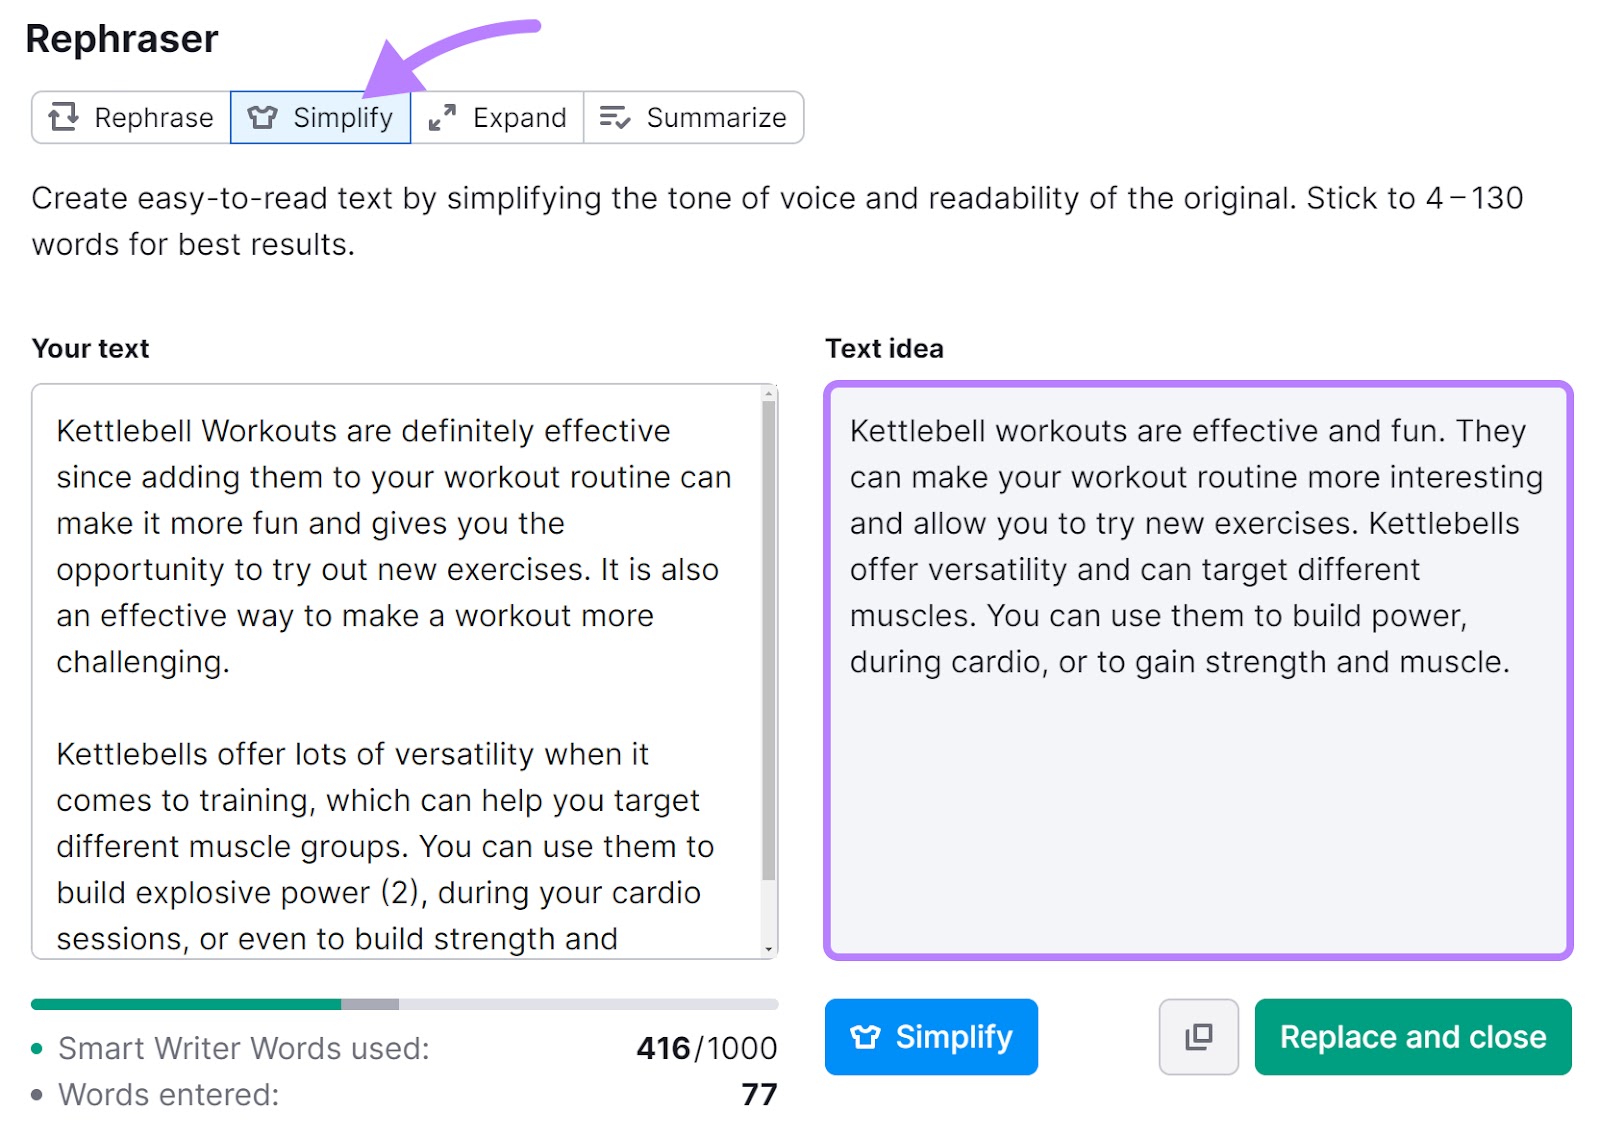 SEO Writing Assistant's "Simplify" feature